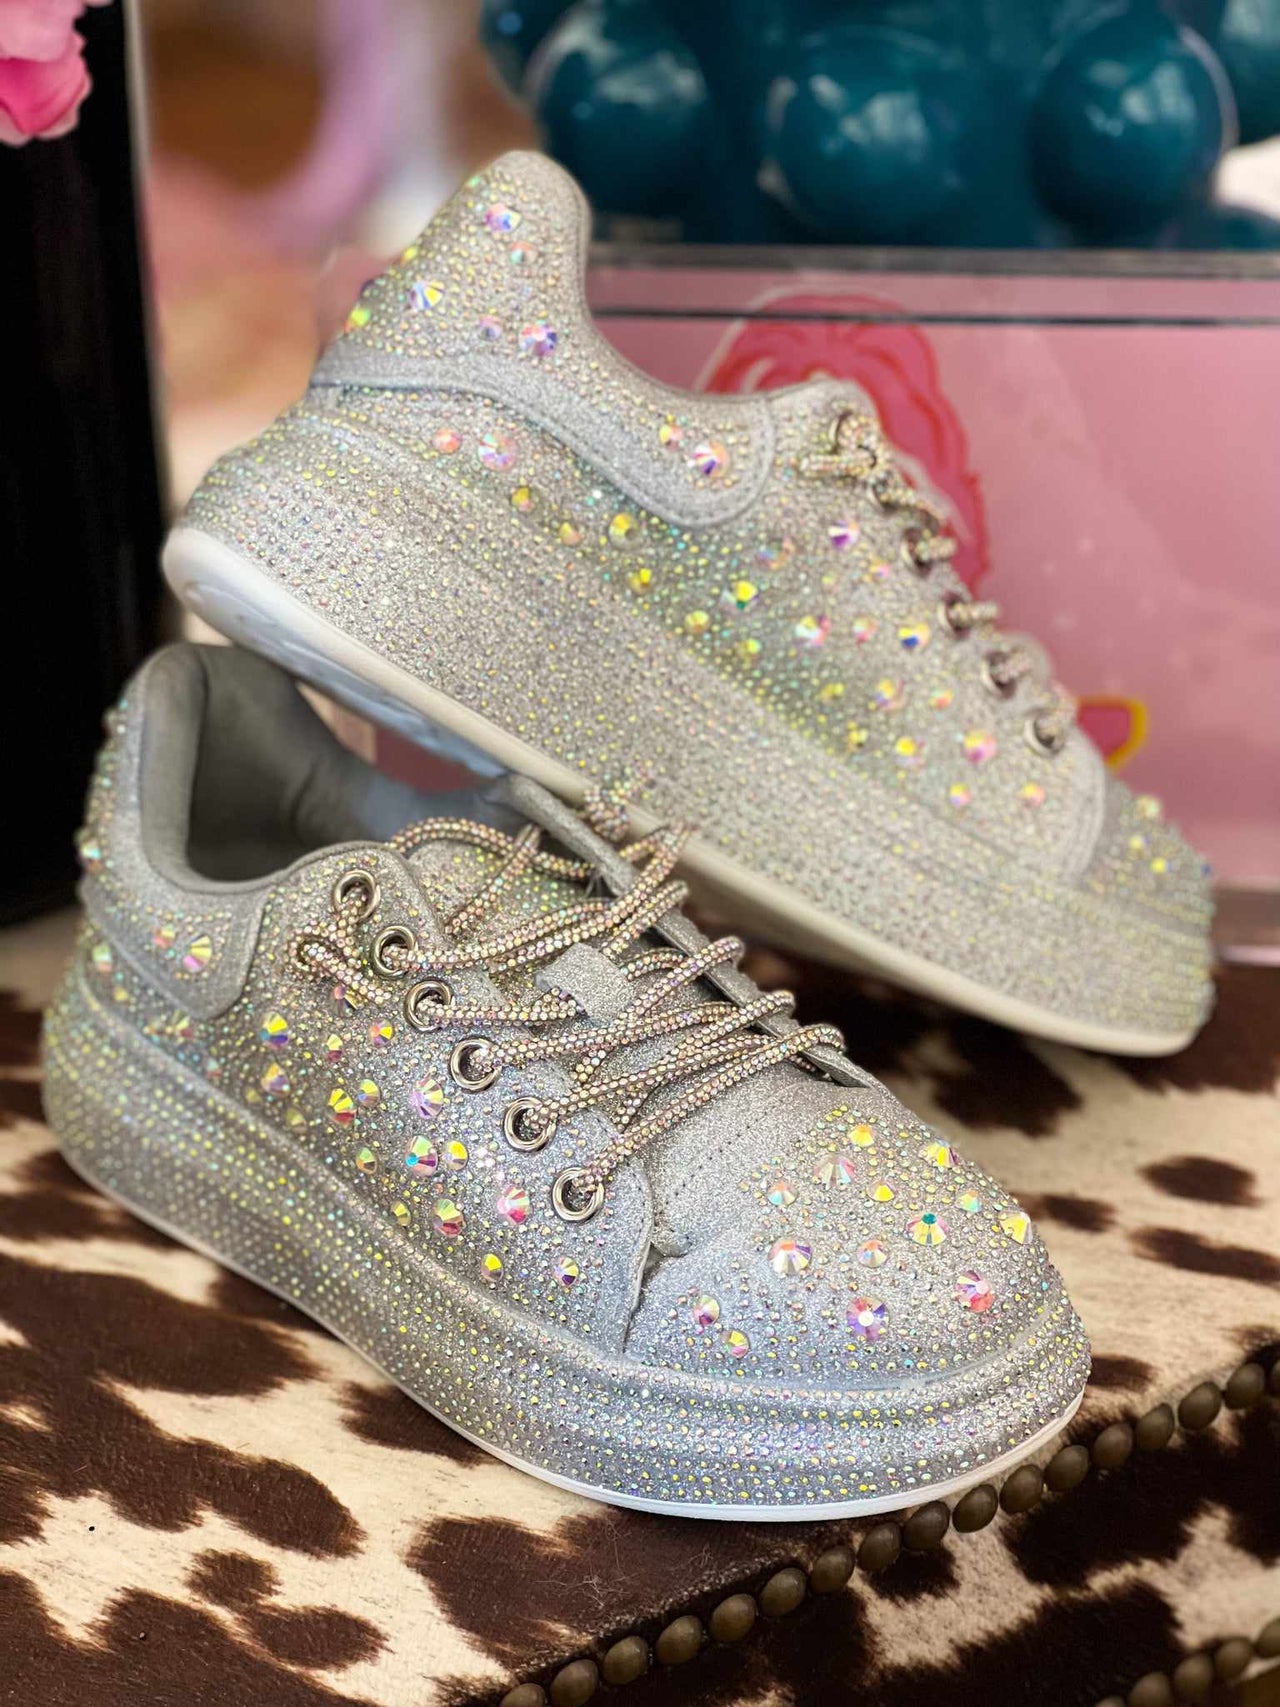 Women's Bling Sneakers for Sale in Queens, NY - OfferUp